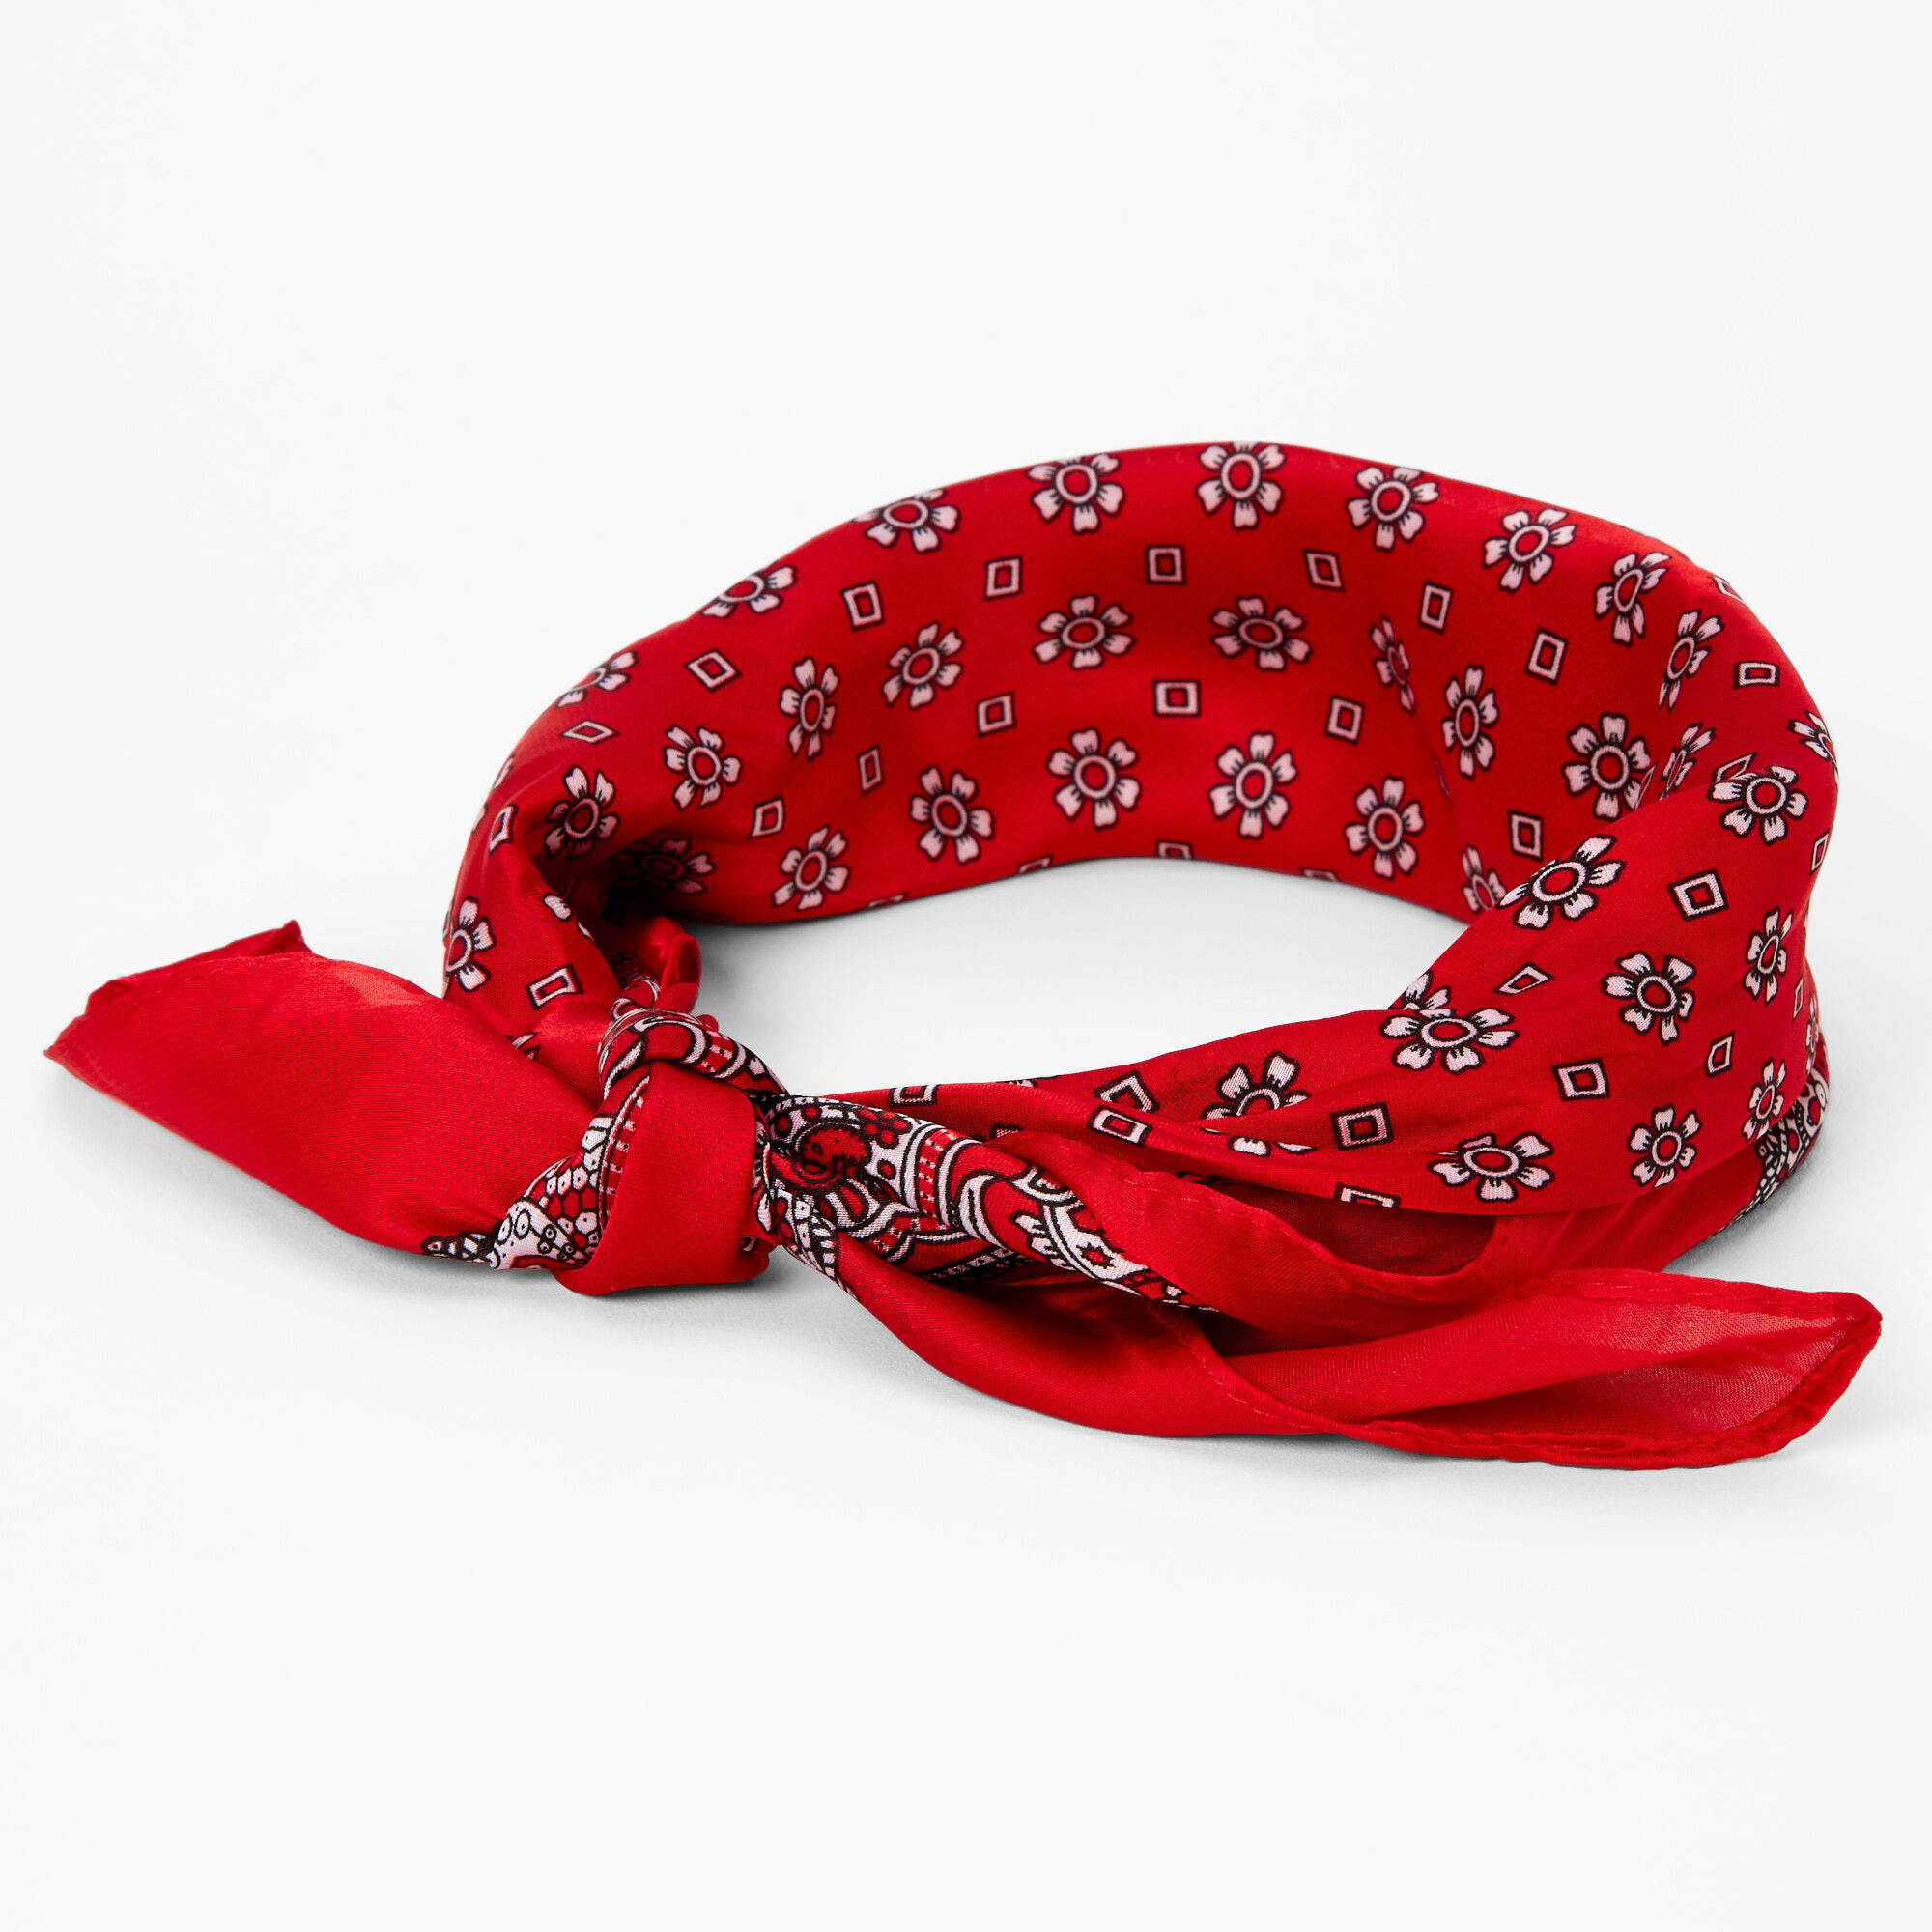 View Claires Floral Paisley Silky Bandana Headwrap Red information